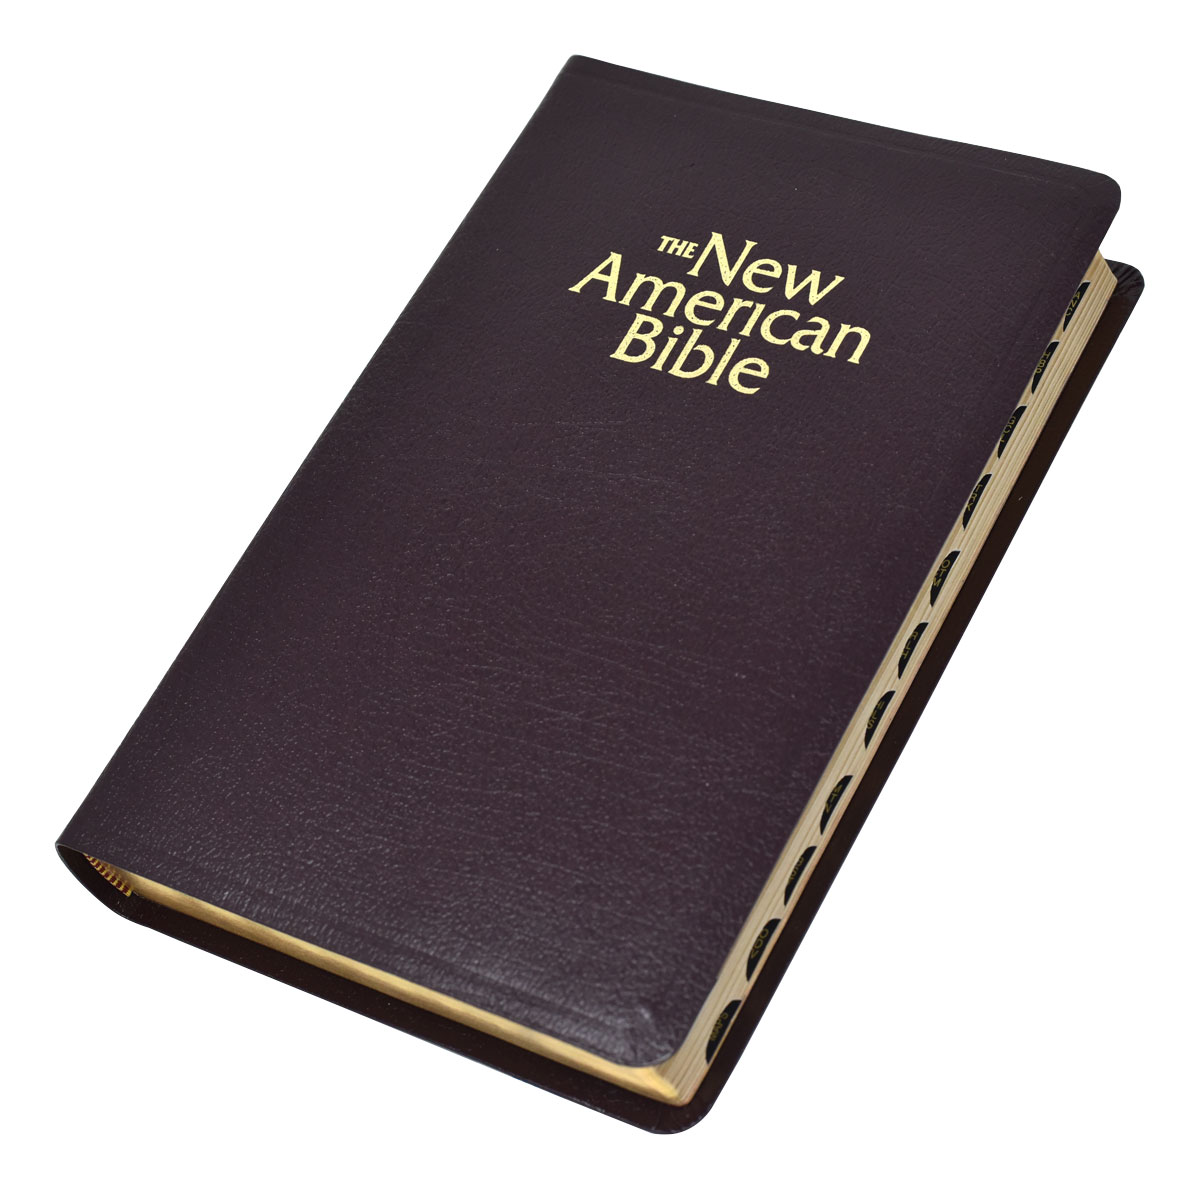 NABRE Deluxe Gift Bible W2406-I Indexed Black Bonded Leather-9780529059994 from Catholic Book Company 